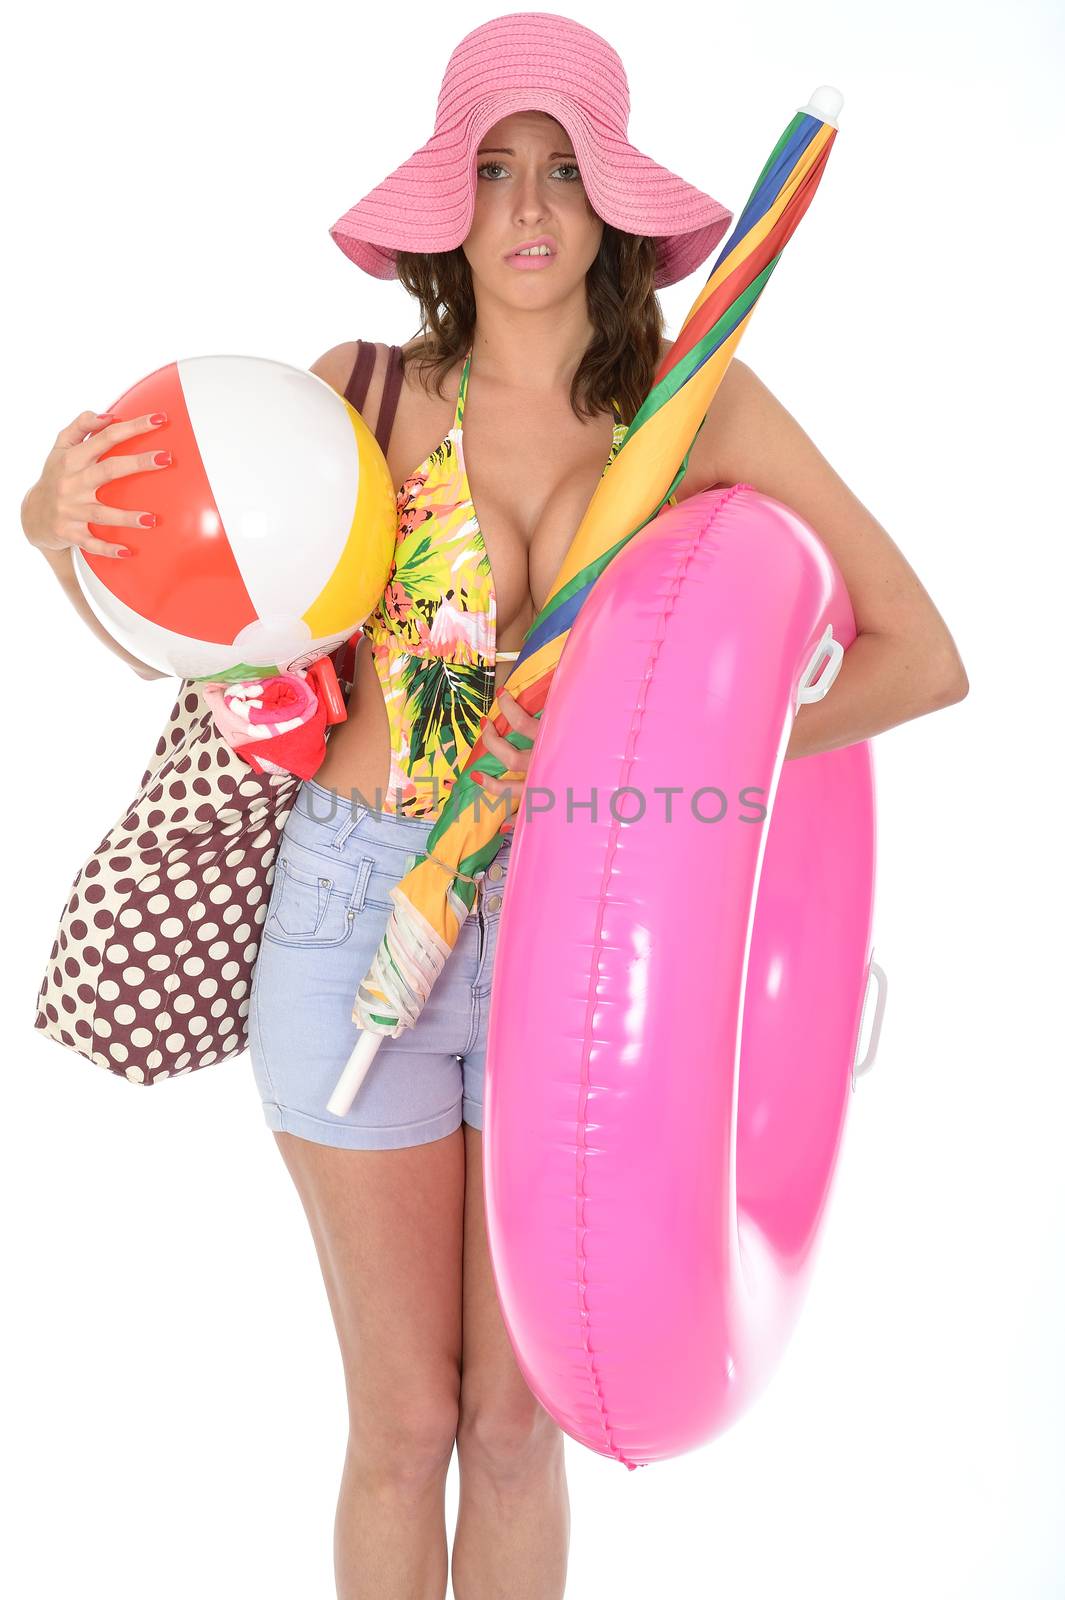 Young Woman Wearing a Swim Suit on Holiday Carrying a Beach Ball by Whiteboxmedia